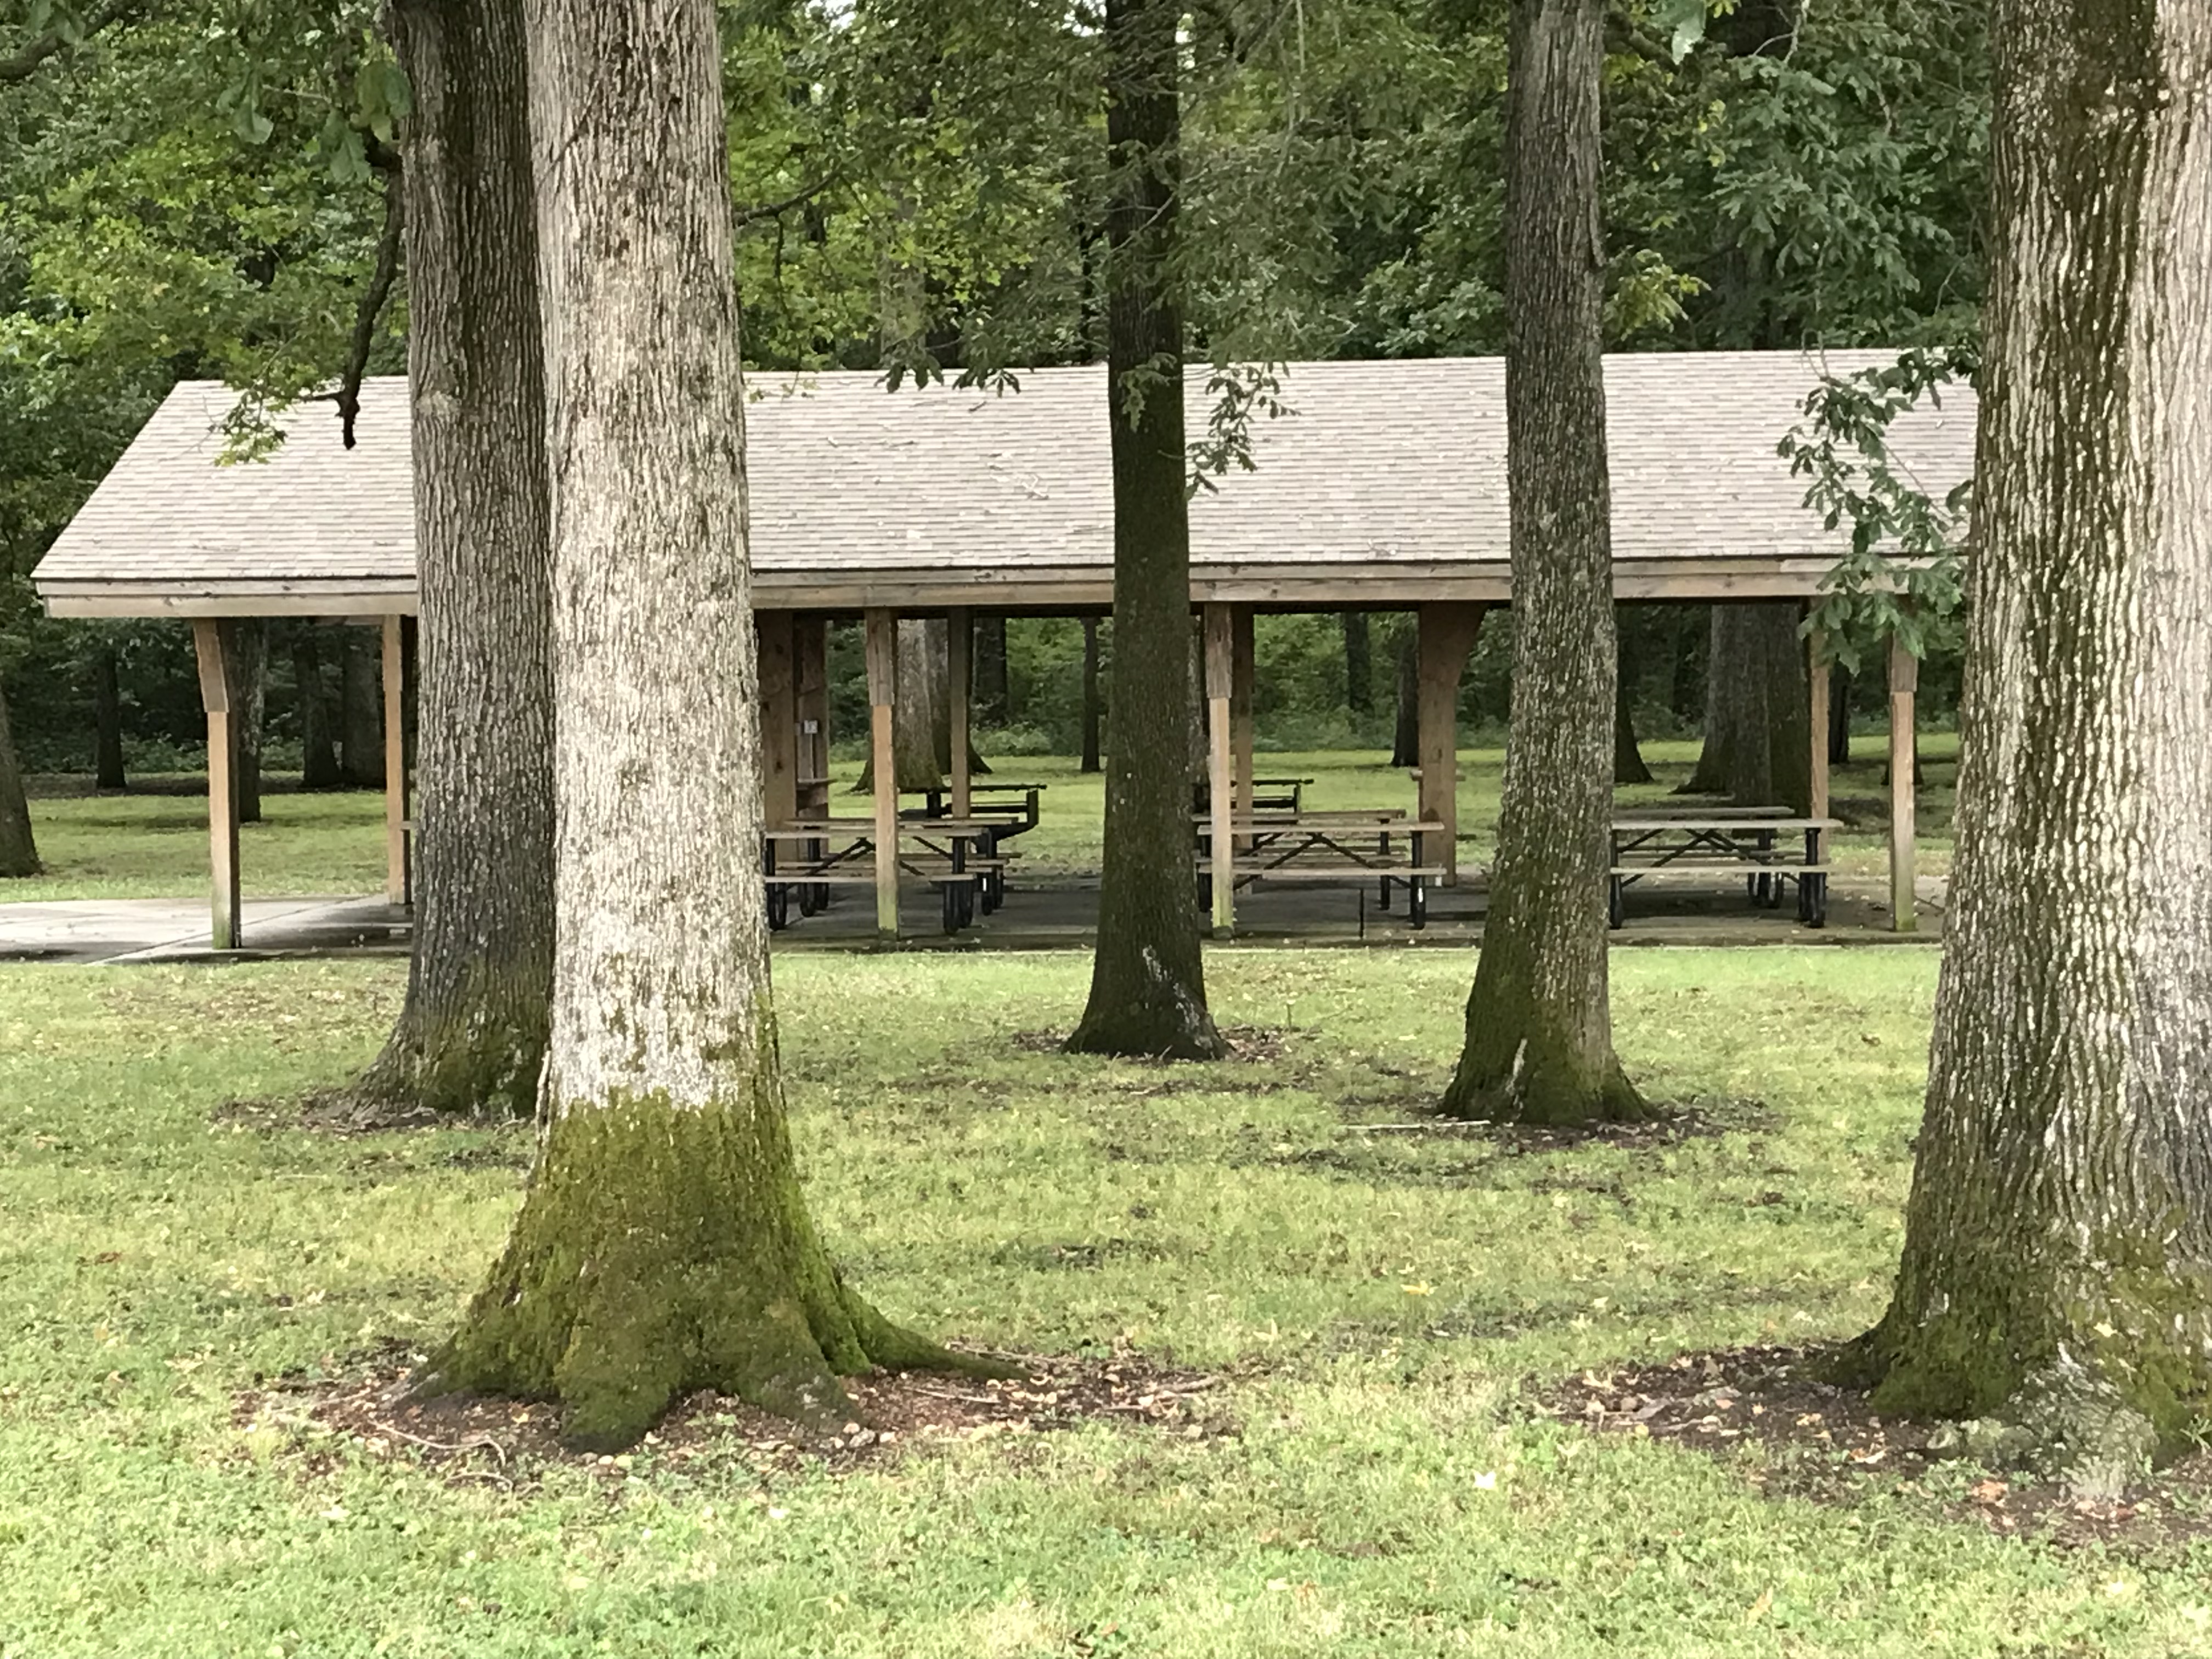 Side view of picnic shelter through a series of tall, mossy trees standing in a field